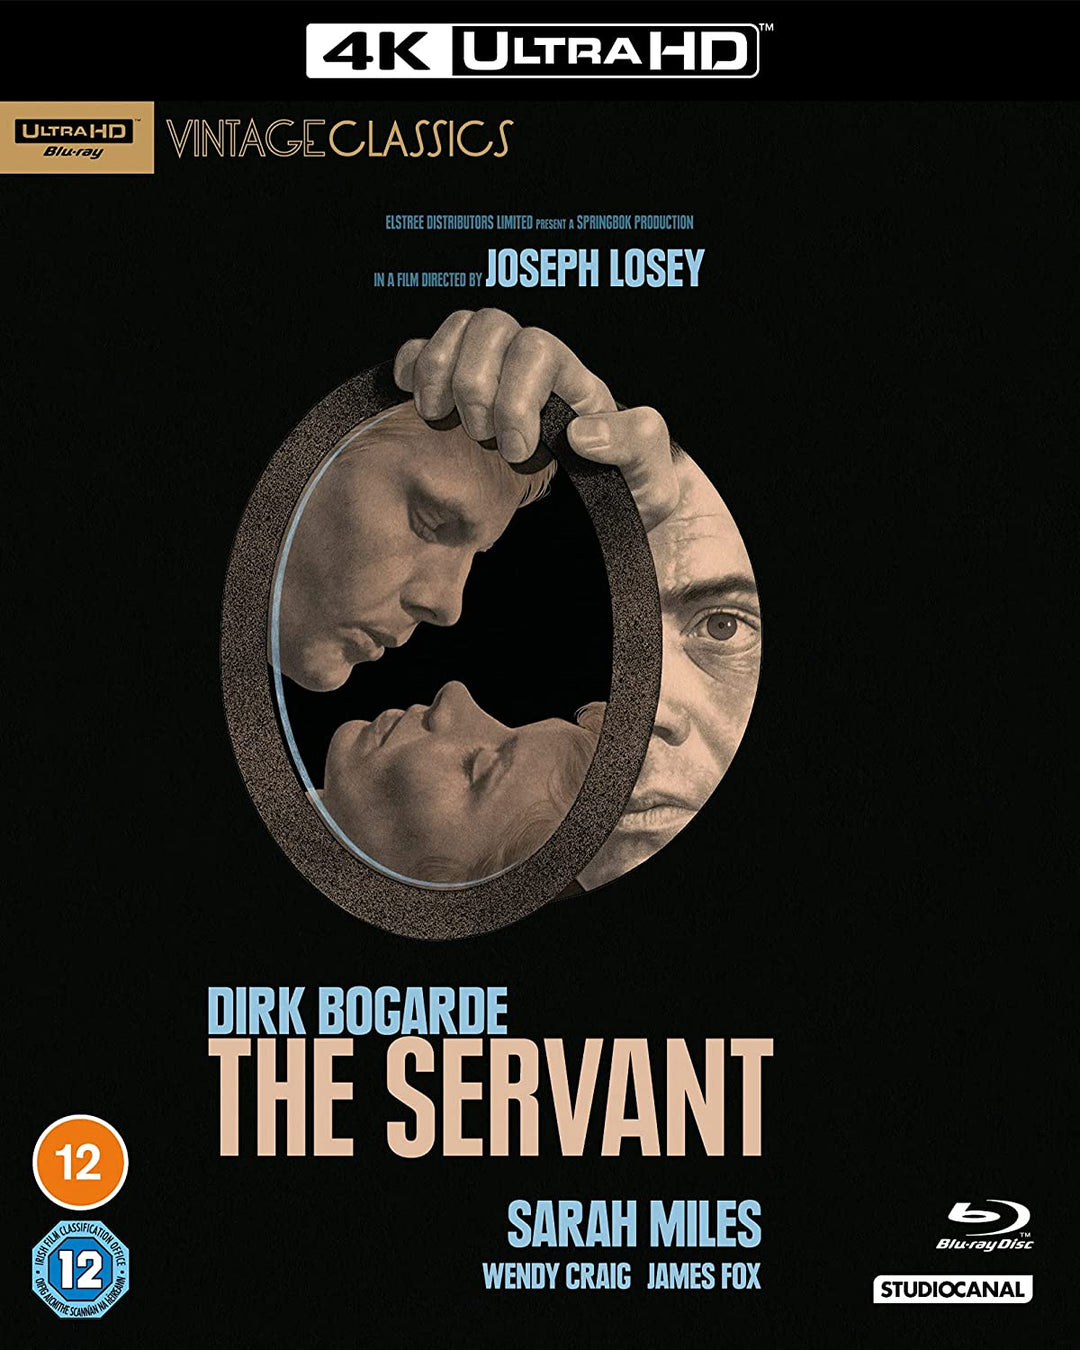 The Servant (Vintage Classics) Collector's Edition [Blu-ray]